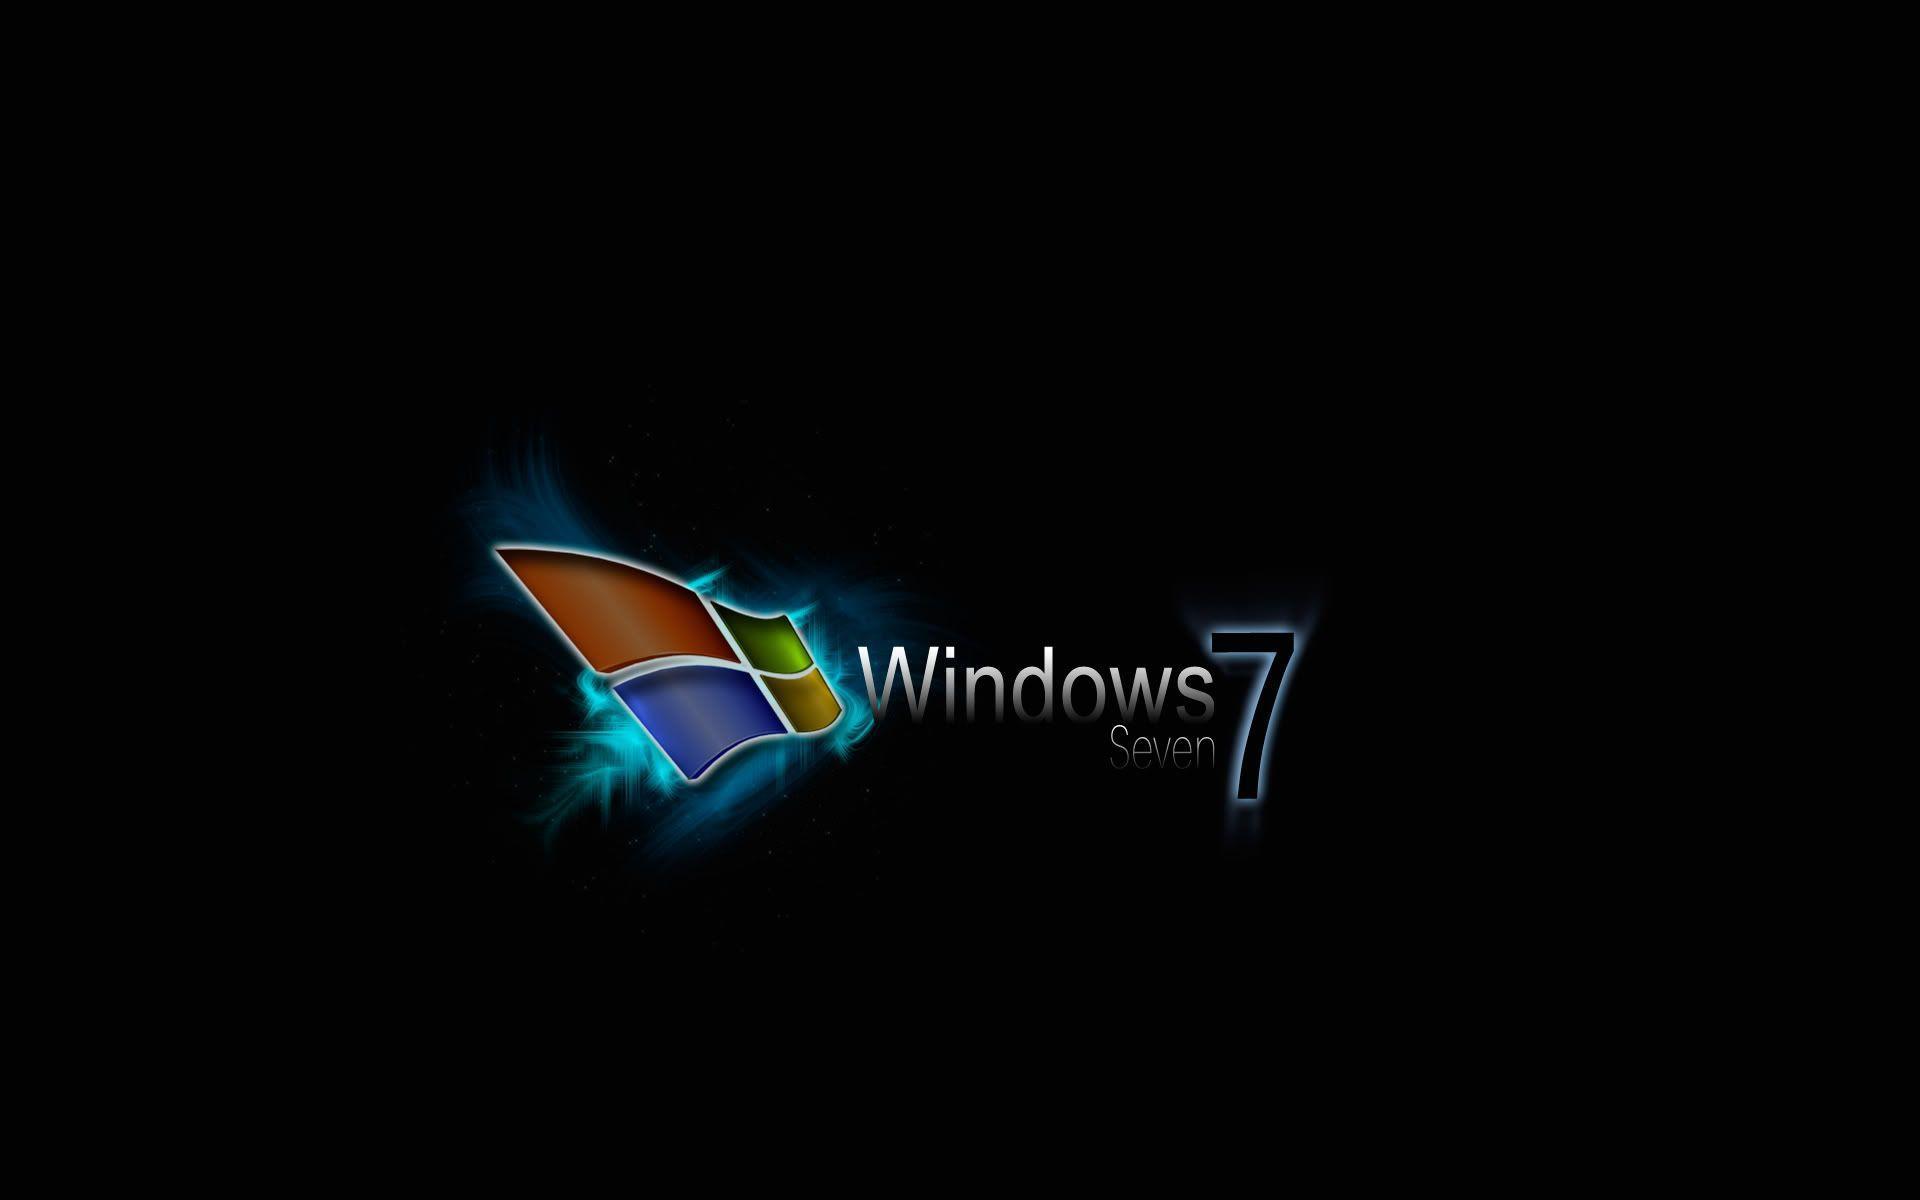 WINDOWS 7 COOL Wallpaper. Free Download Collections 33 High